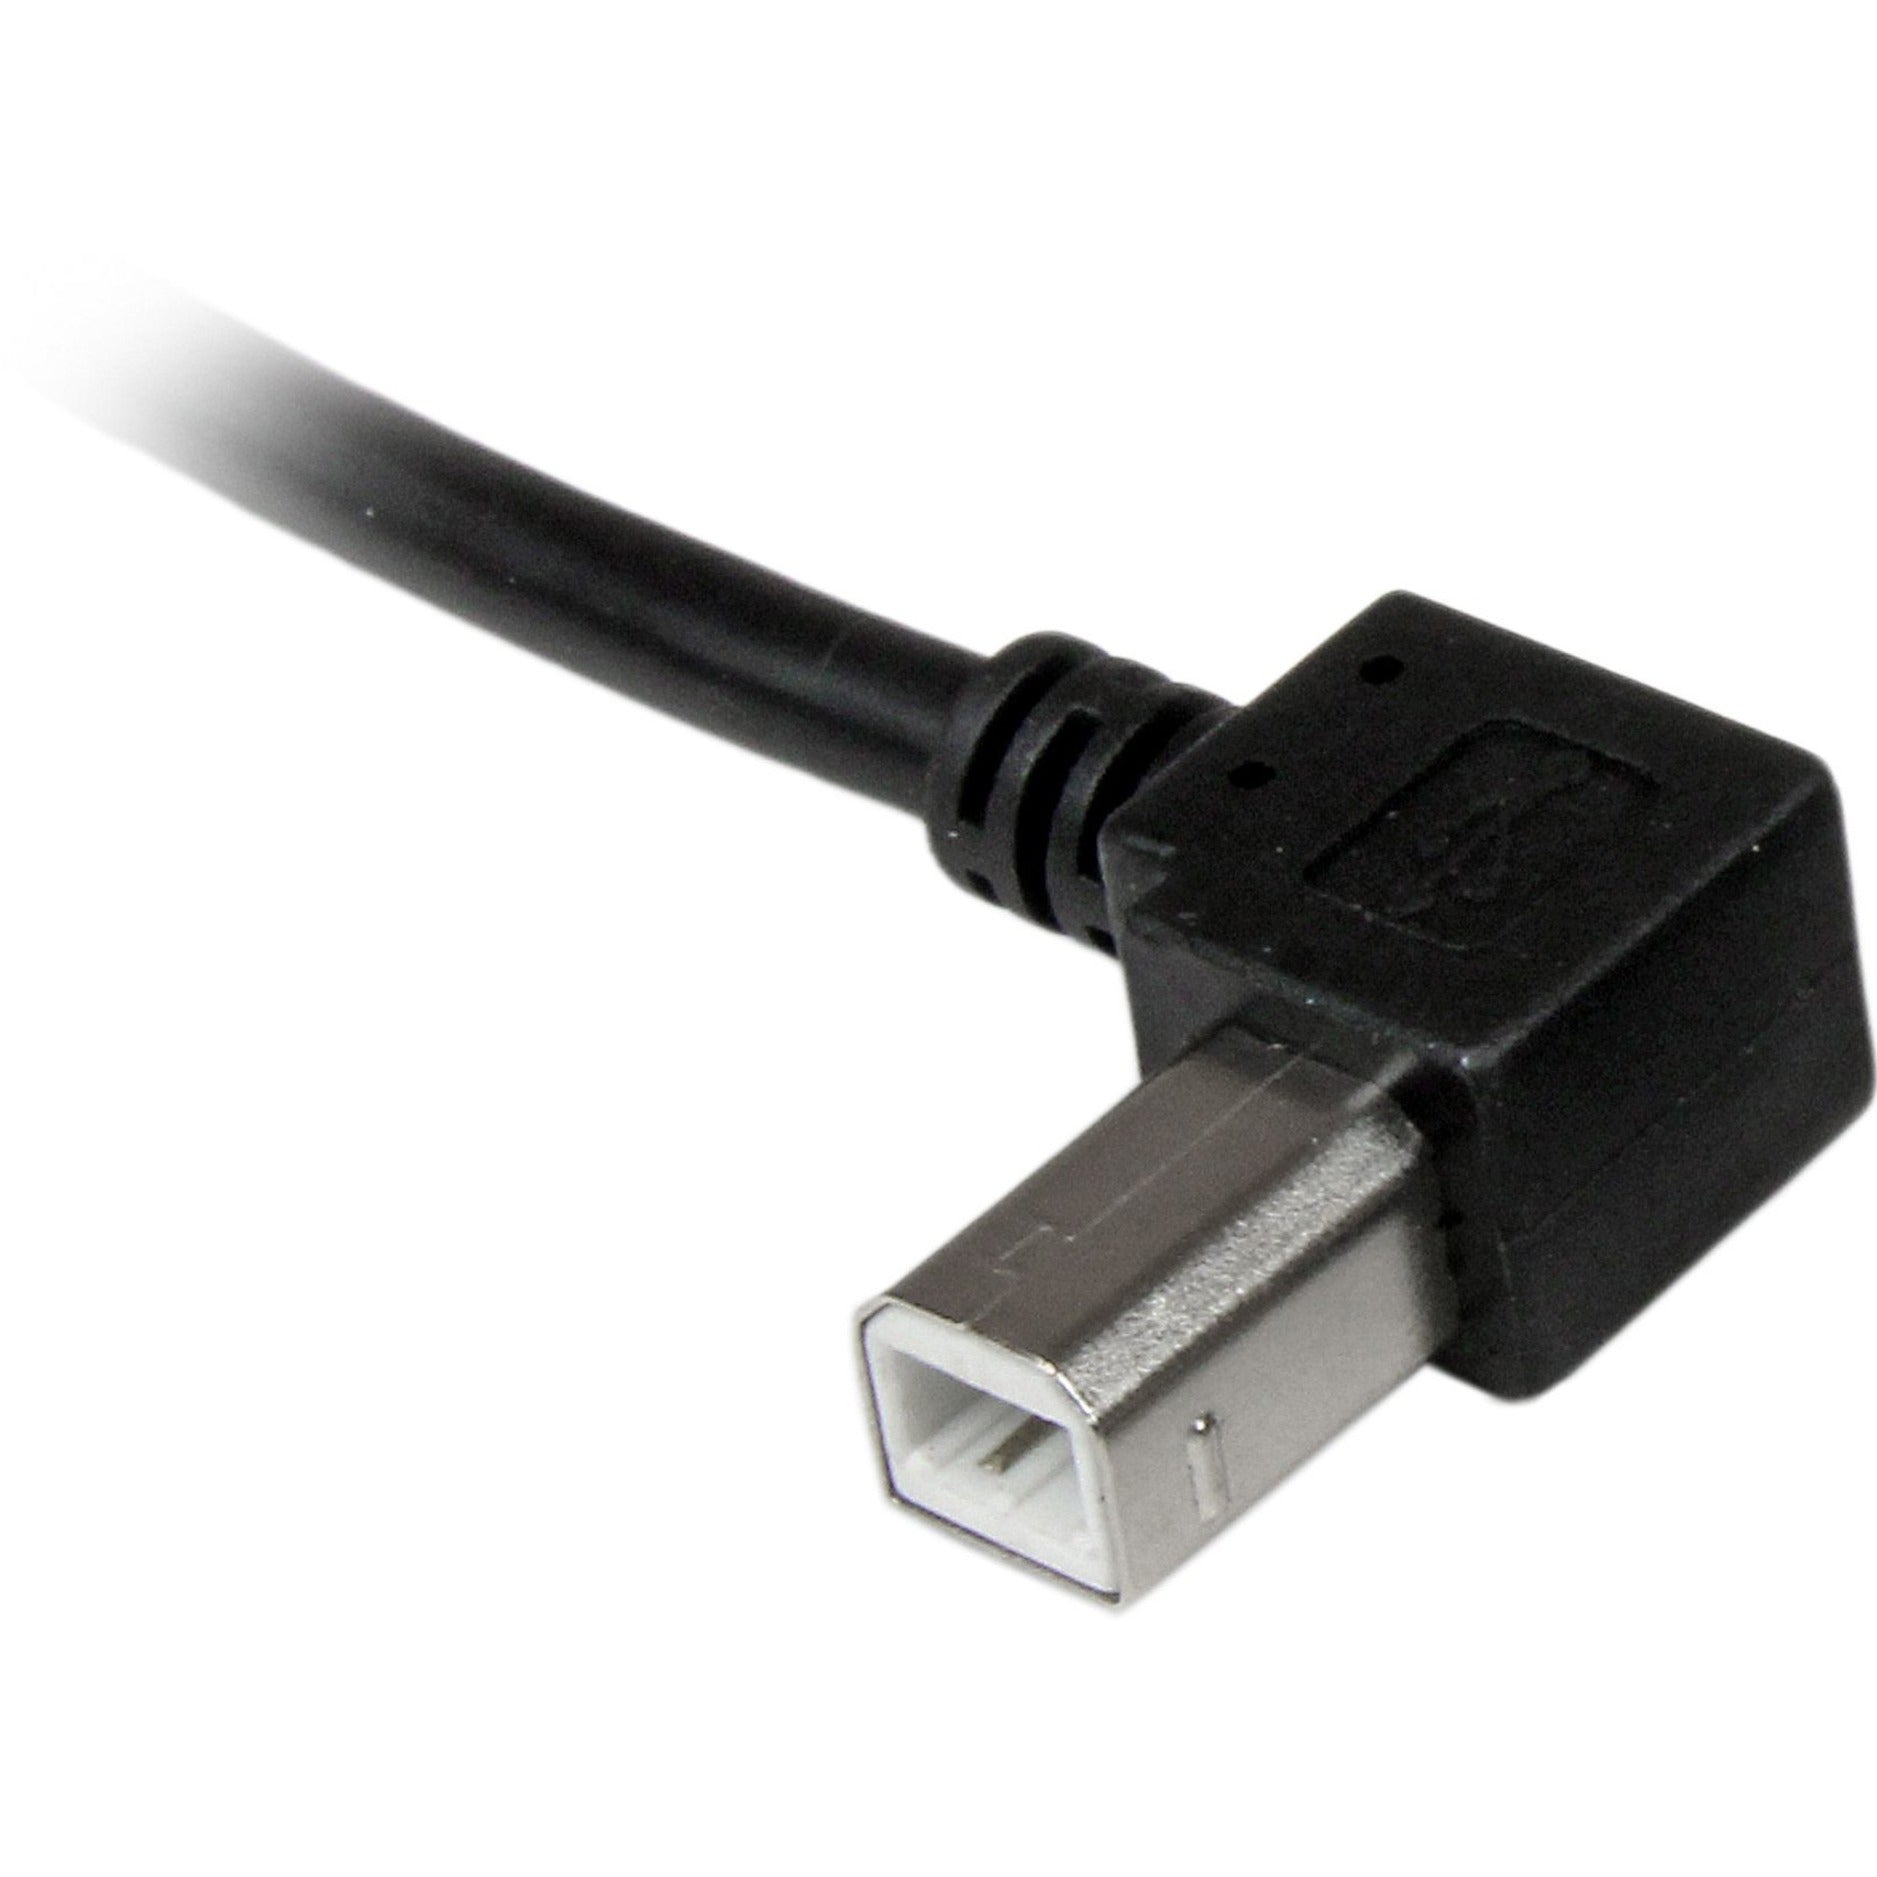 StarTech.com USBAB3ML 3m USB 2.0 A to Left Angle B Cable - M/M, 9.84 ft Data Transfer Cable